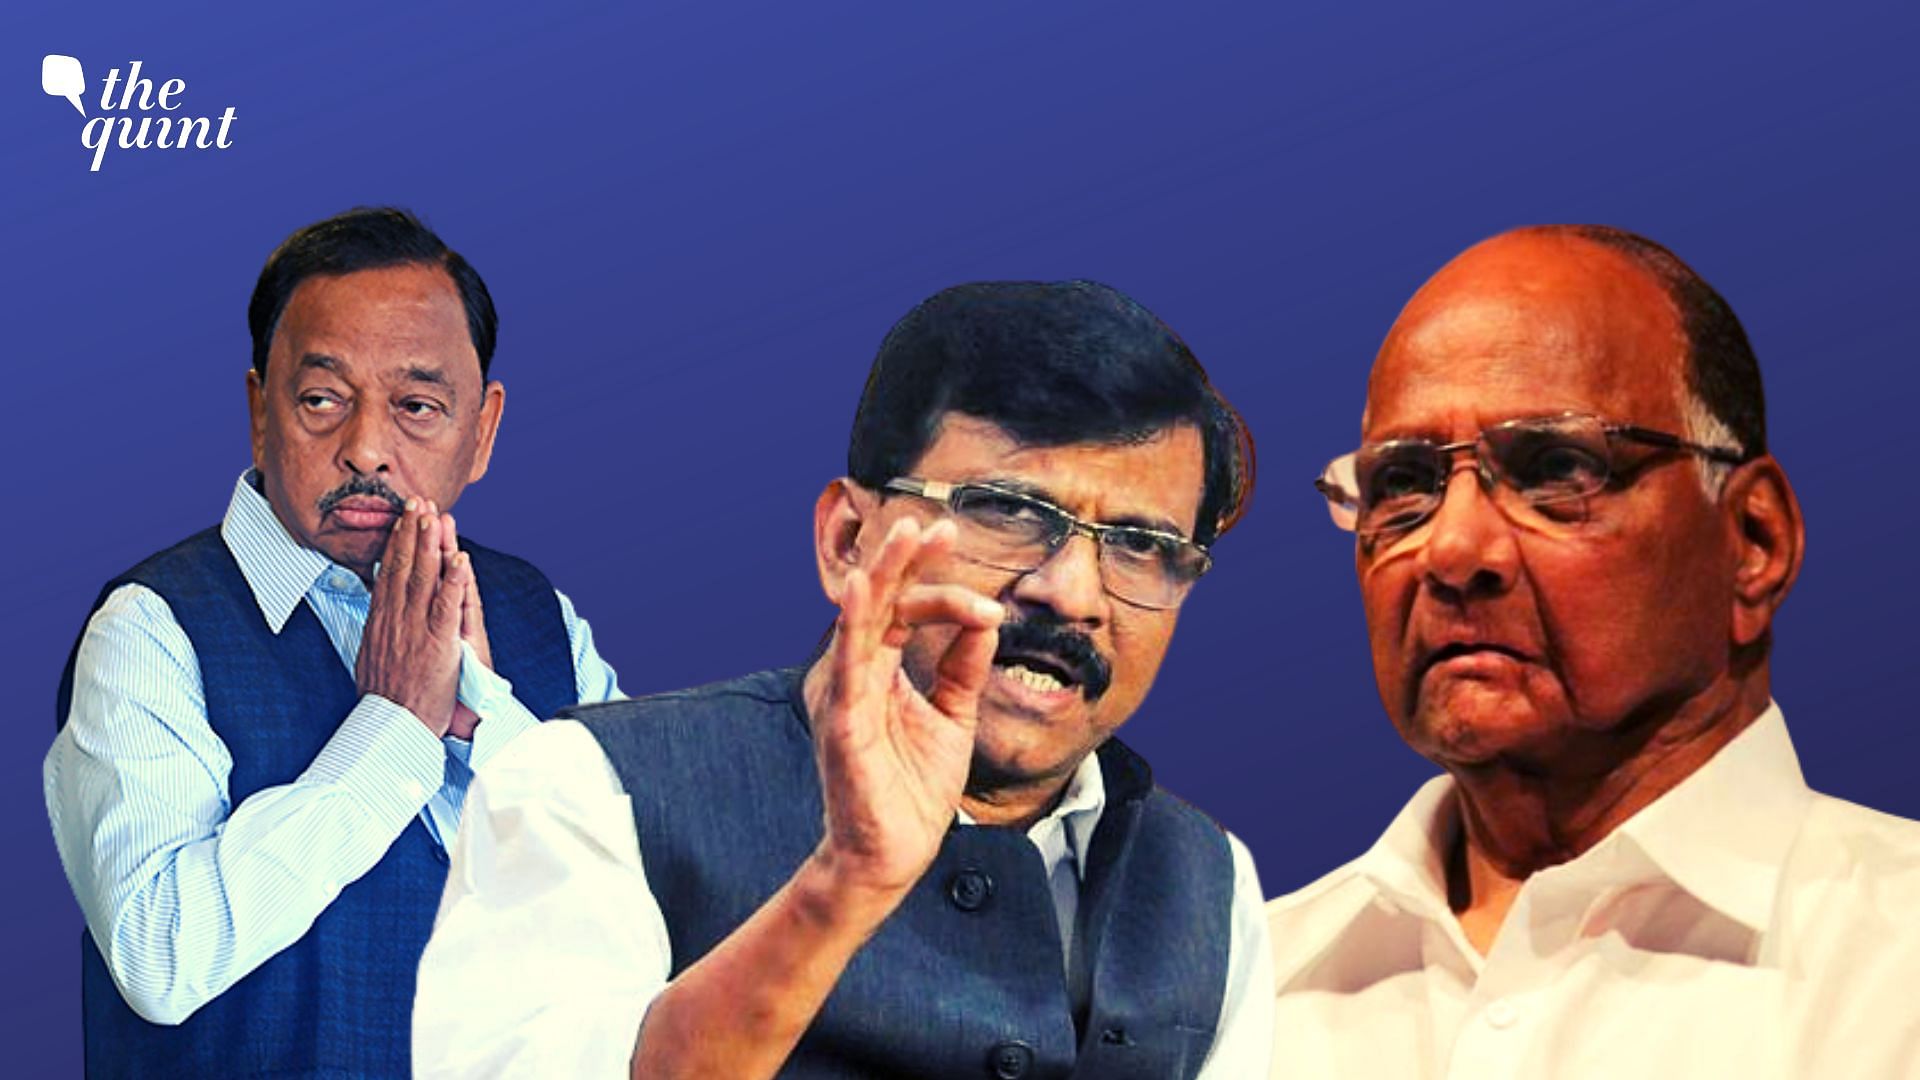 <div class="paragraphs"><p><a href="https://www.thequint.com/topic/sanjay-raut">Sanjay Raut</a> slammed Union Minister Narayan Rane for allegedly issuing "threats" to NCP chief Sharad Pawar and said, “Some people have garnered guts to issue threats to Sharad Pawar. PM Modi and Amit Shah must take note of this.”</p></div>